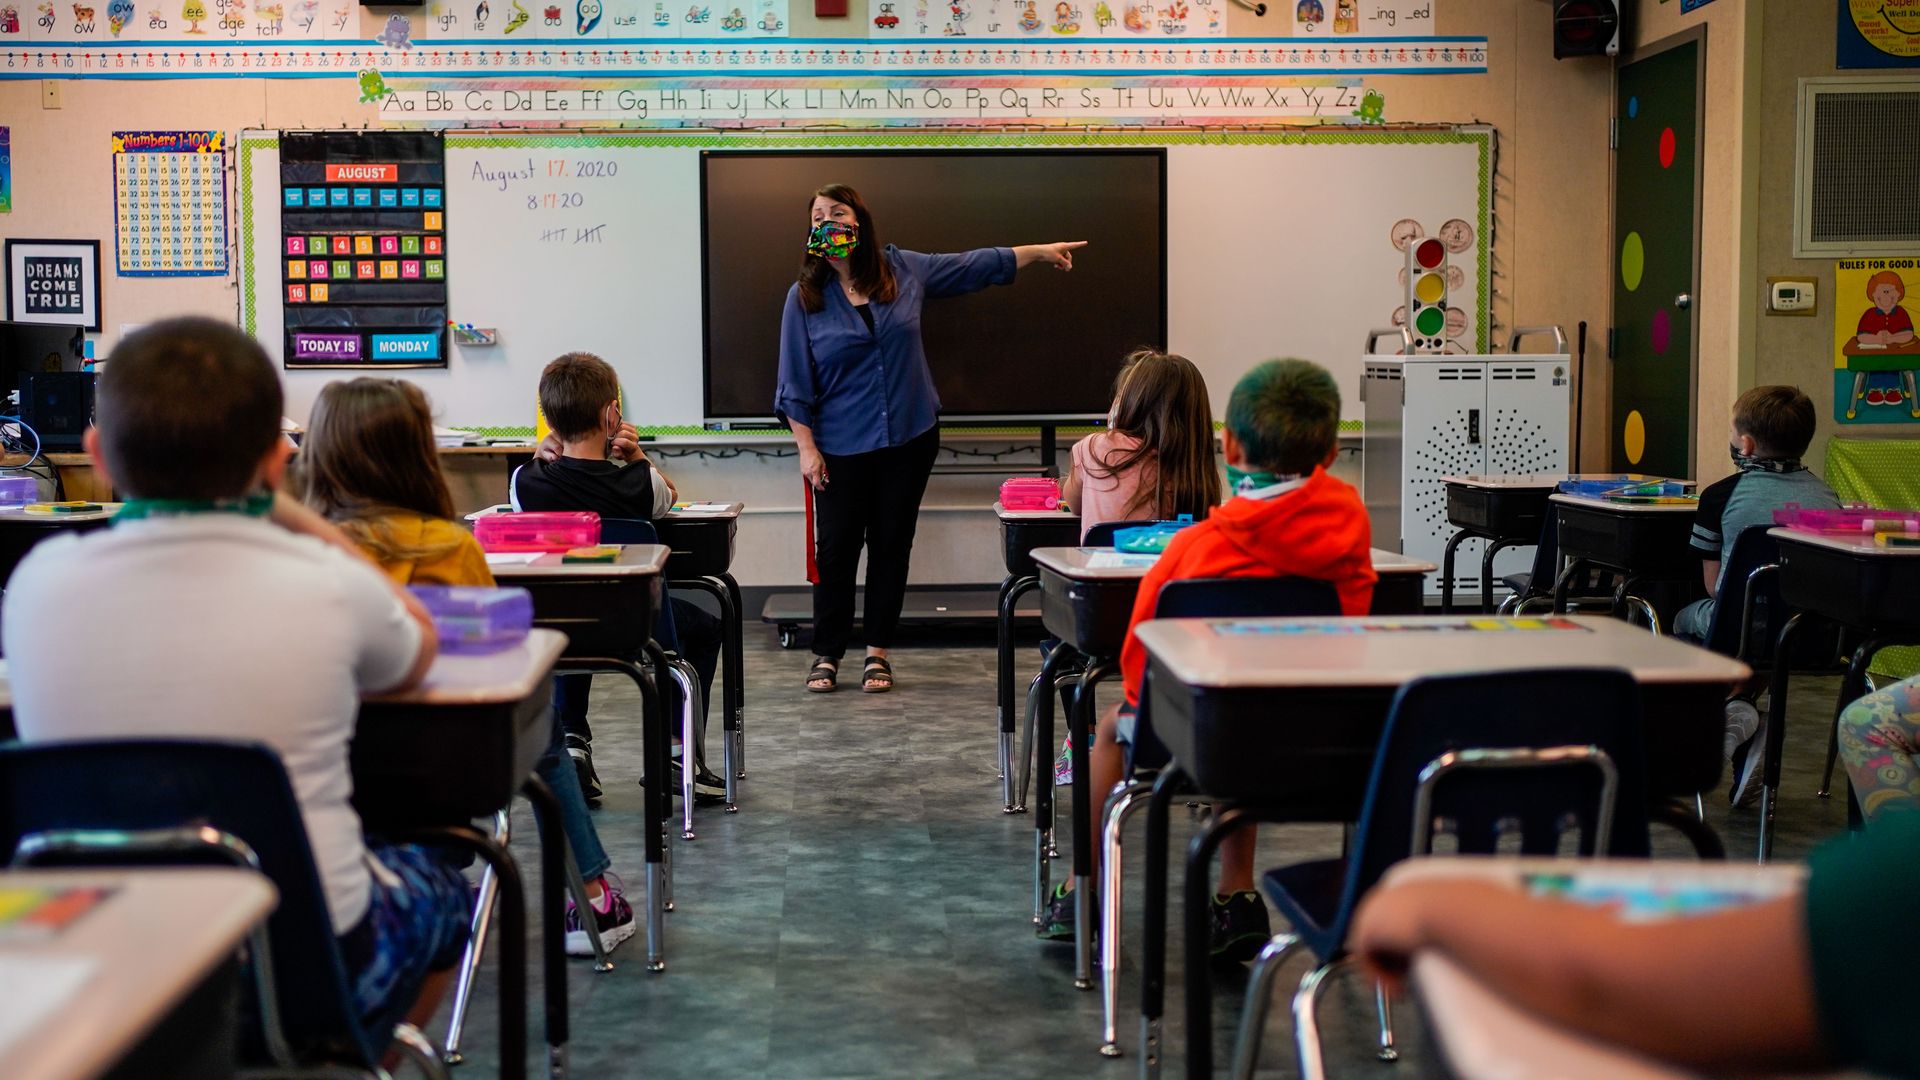 Photo of a teacher standing at the front of a classroom and pointing to their left as students sit at their desks in rows